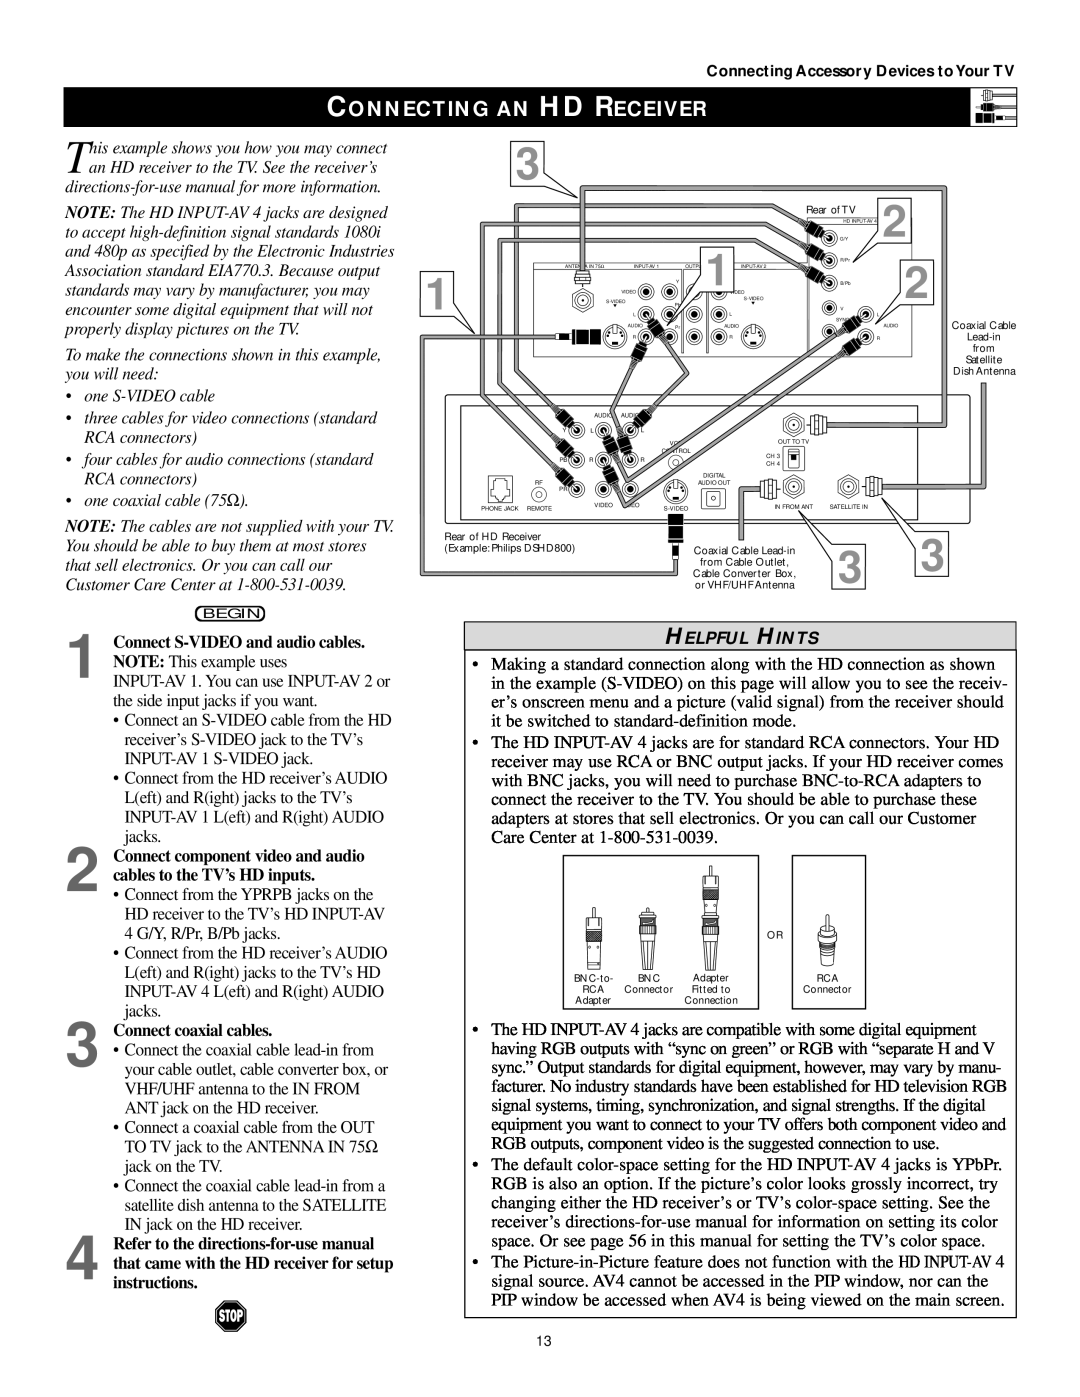 Philips 60PP9202 manual Connecting An Hd Receiver, Helpful Hints, Connect S-VIDEO and audio cables. NOTE This example uses 